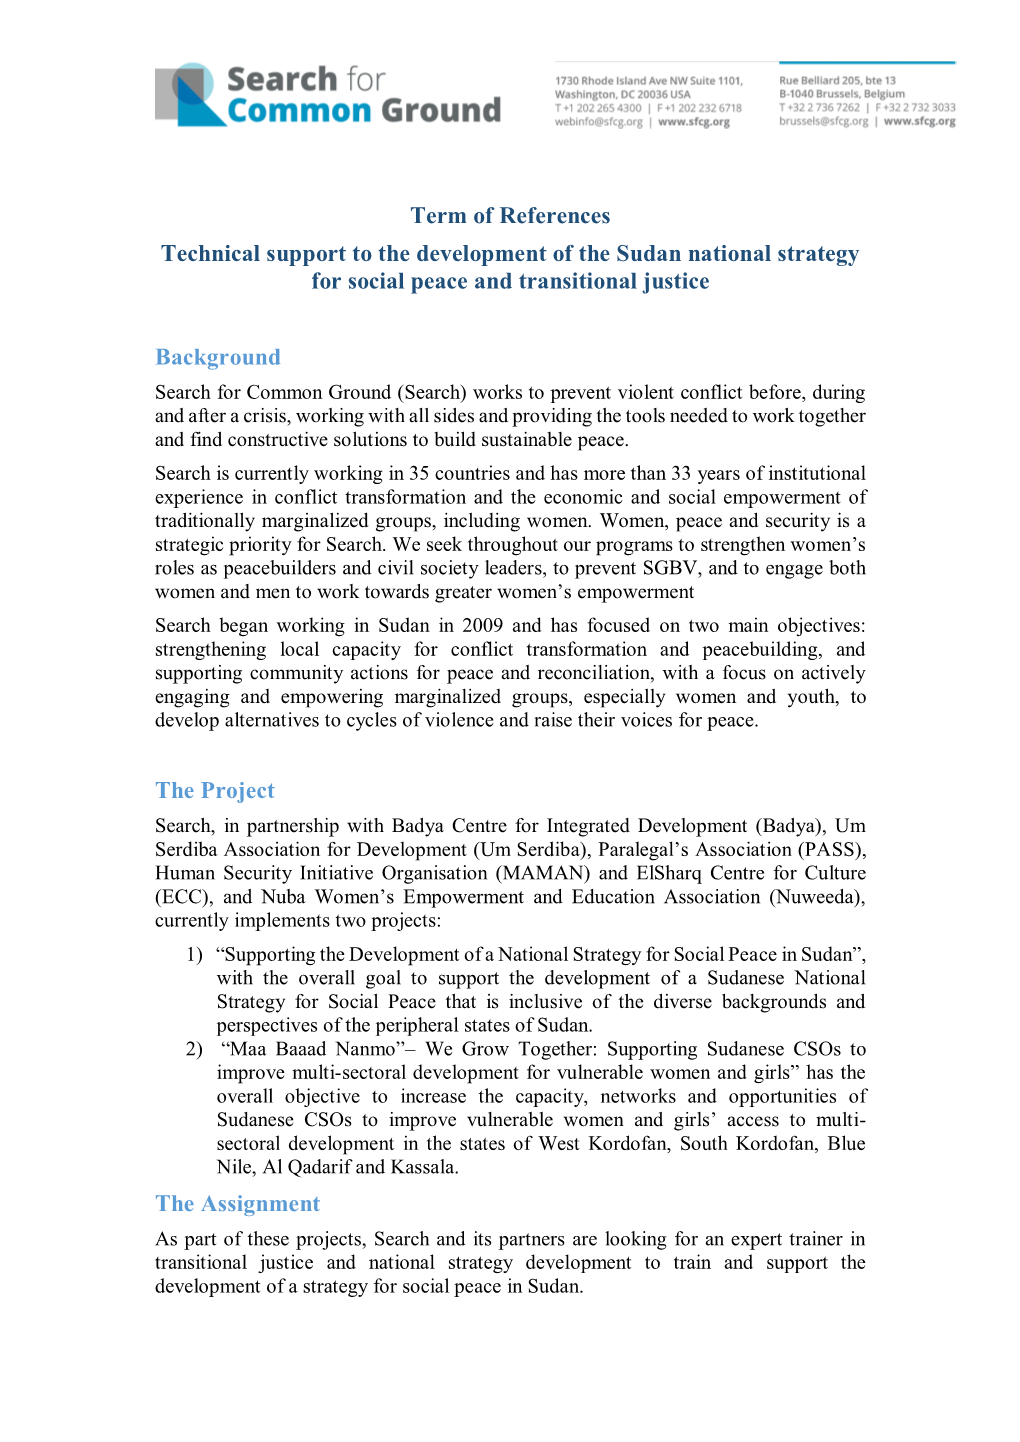 Term of References Technical Support to the Development of the Sudan National Strategy for Social Peace and Transitional Justice